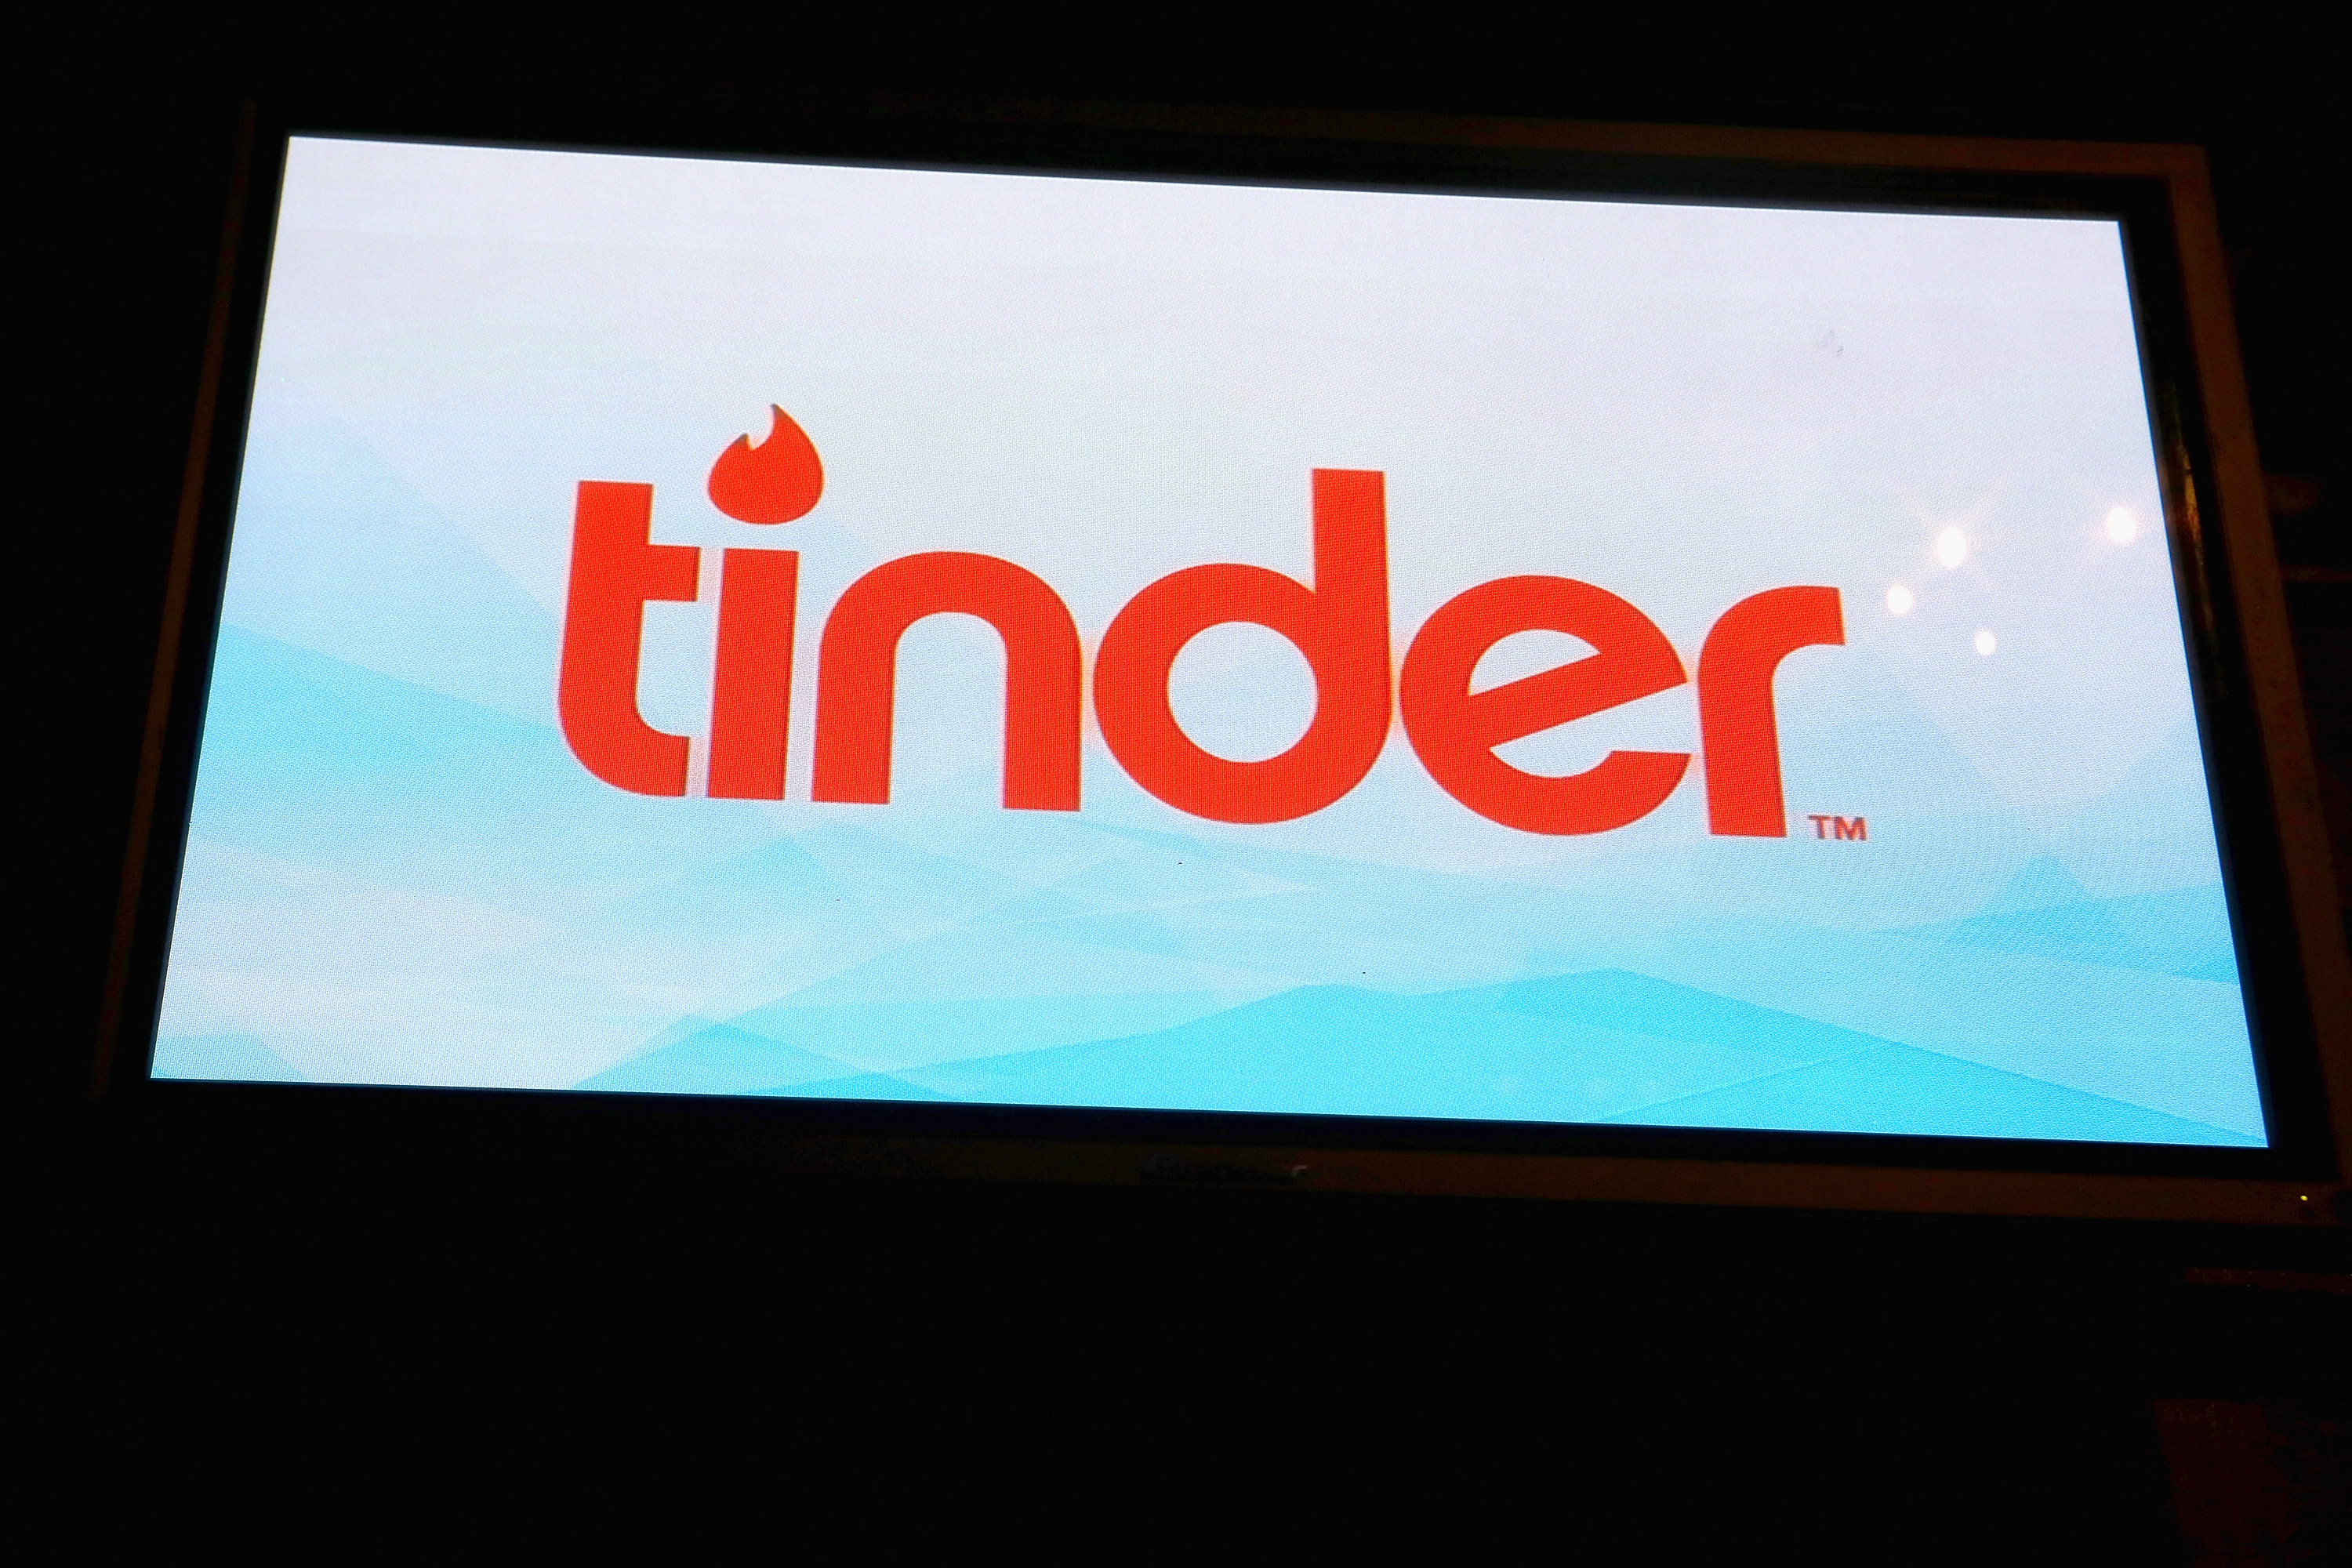 Tinder on display at the Billboard Winterfest at Park City Live! on January 22, 2016 in Park City, Utah. (Mat Hayward&mdash;Billboard/Getty Images)